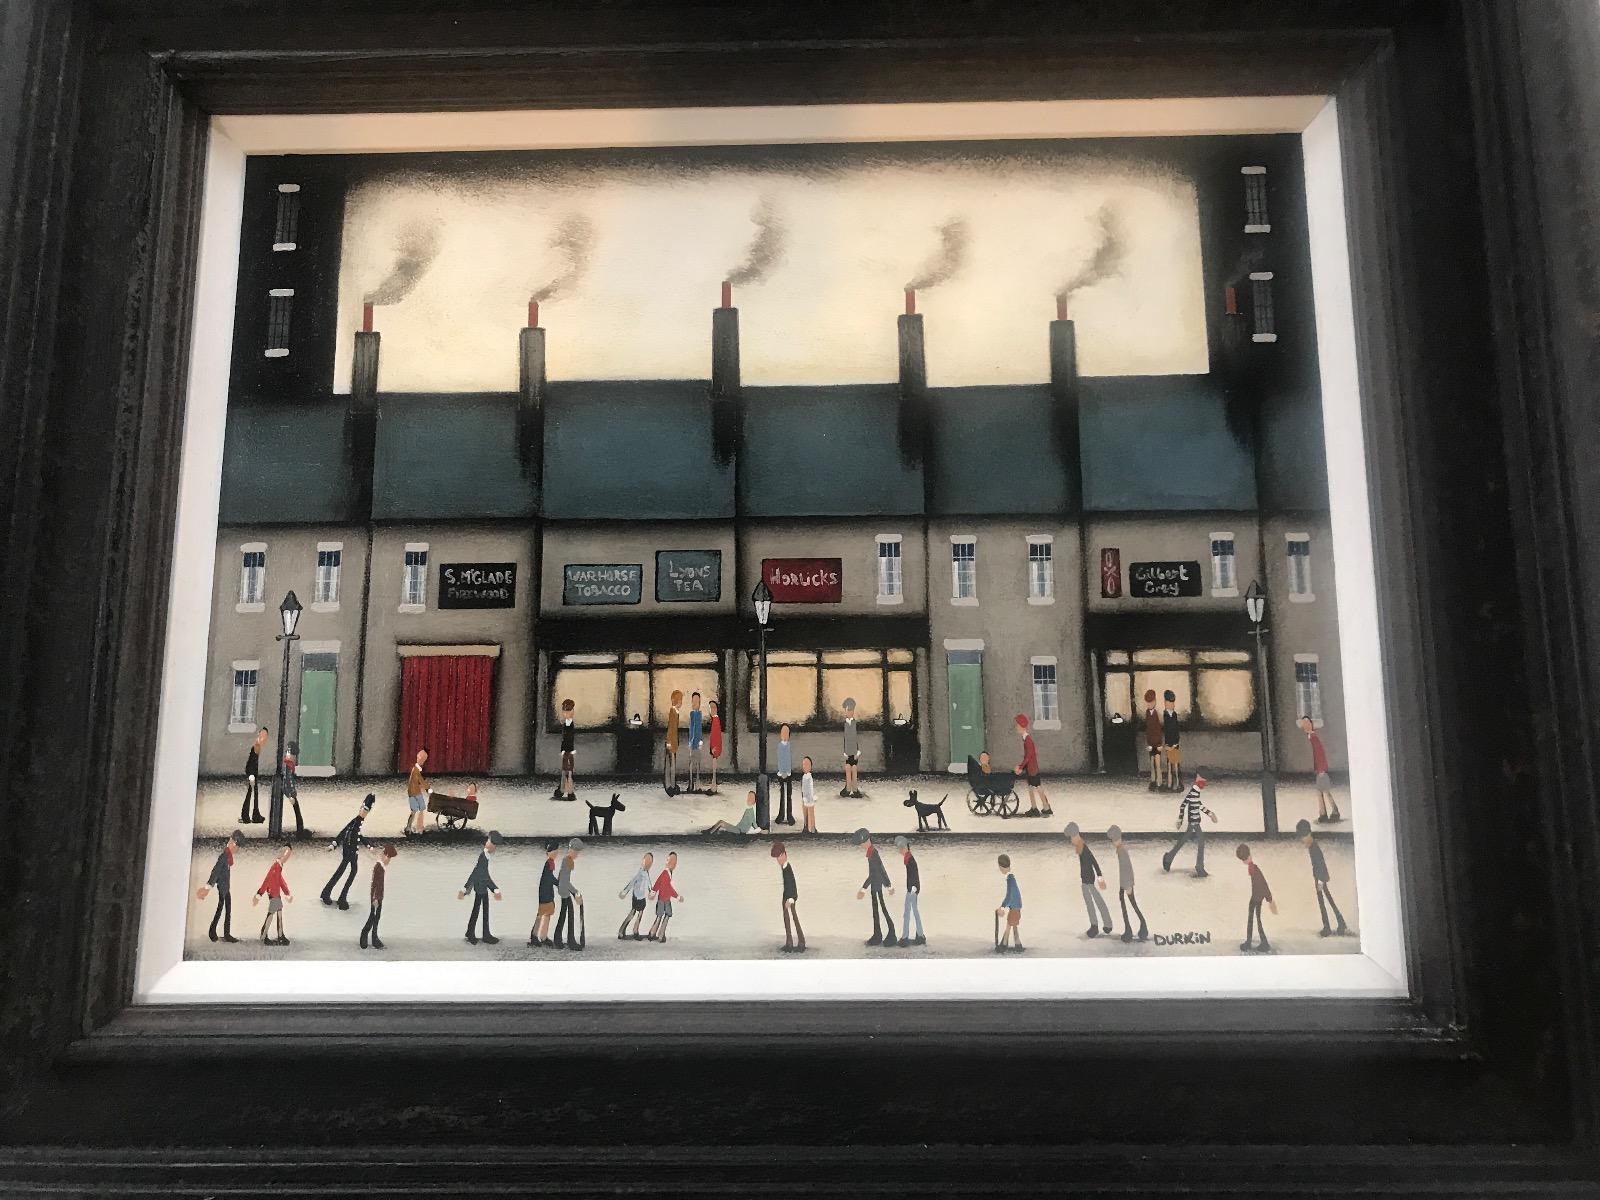 
Oil painting by Sean Durkin of a high street scene showing a busy day shopping.  It depicts an old town image with smokey chimney stacks.

ADDITIONAL INFORMATION:

Busy High Street by Sean Durkin

Original Oil Painting

Oil on Panel

Complete size